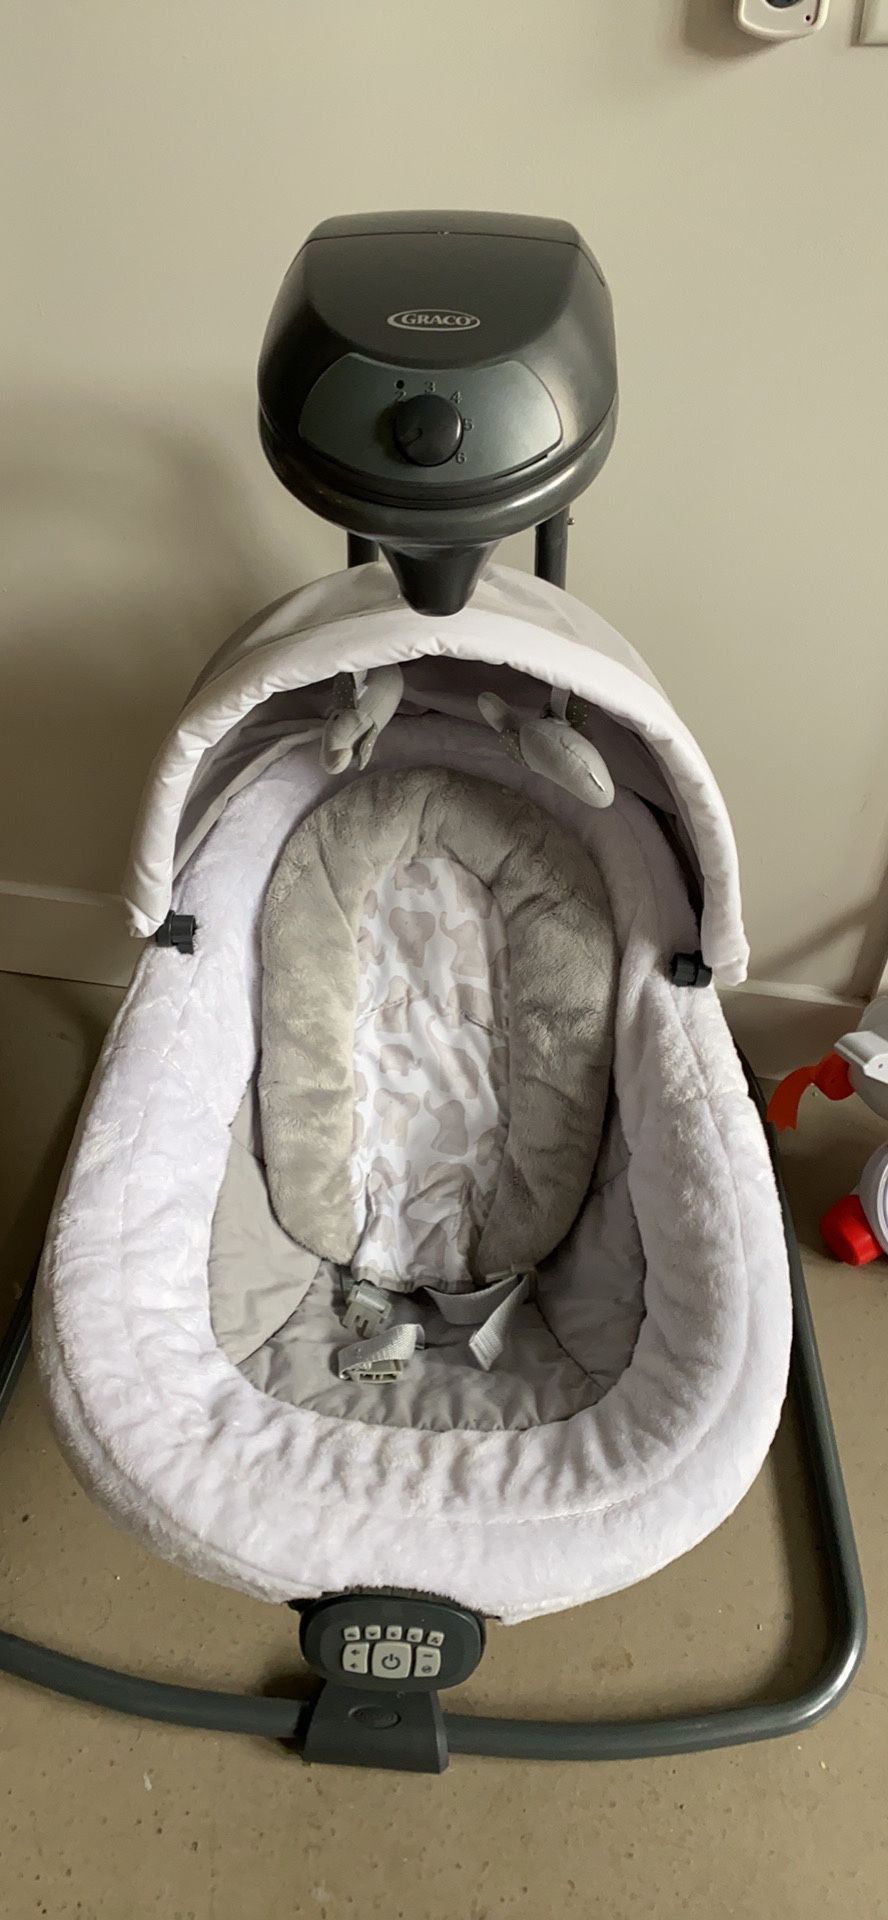 Graco baby Swing - Like New Condition 